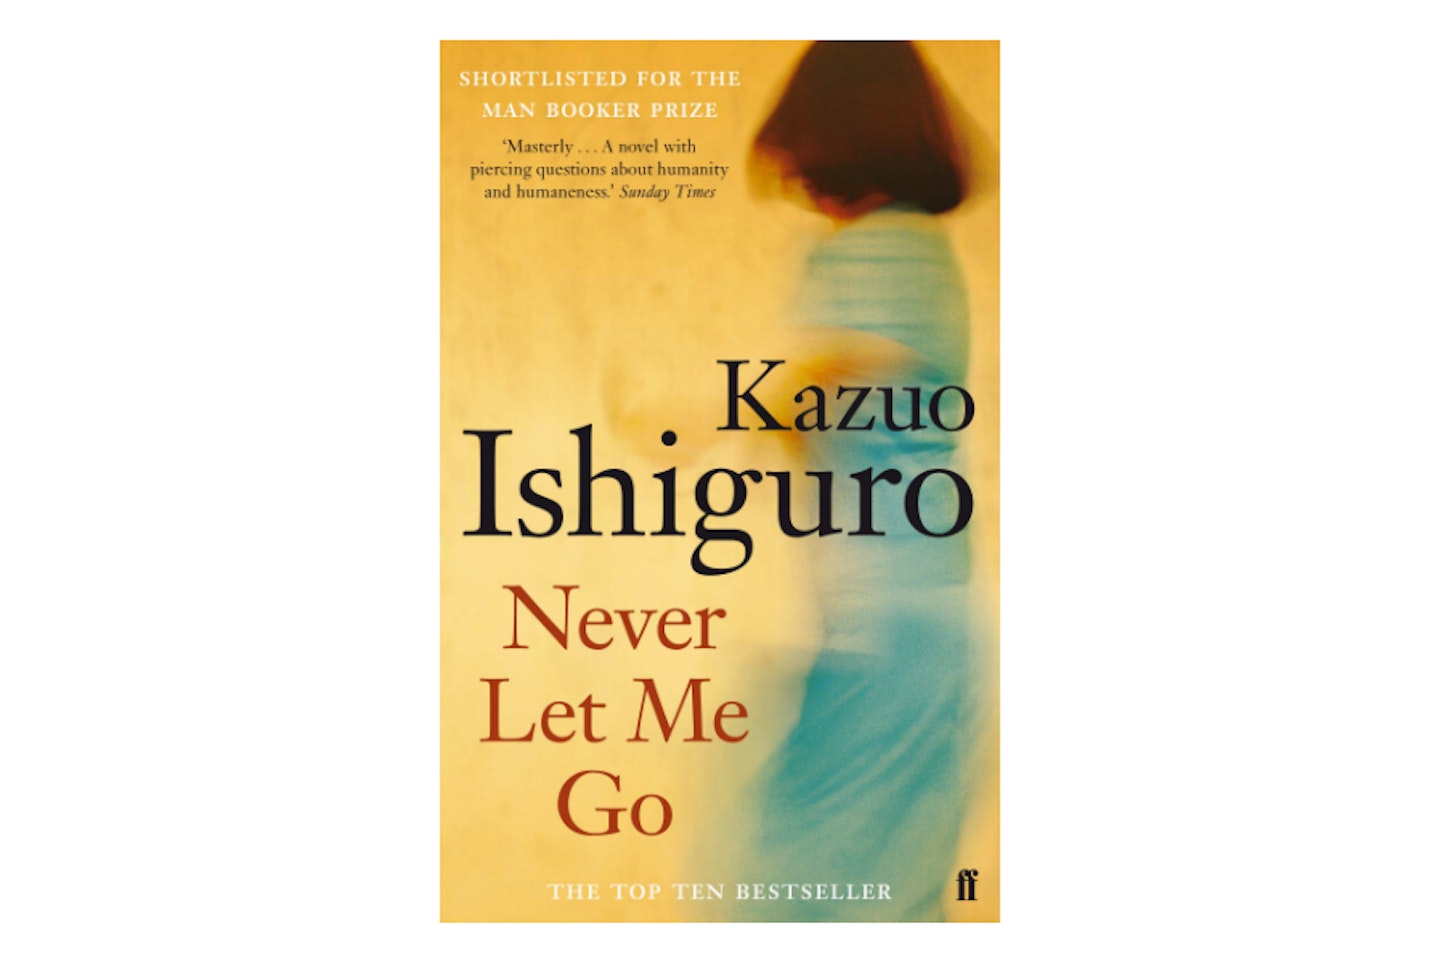 Never Let Me Go by Kazuo Ishiguro, 2005